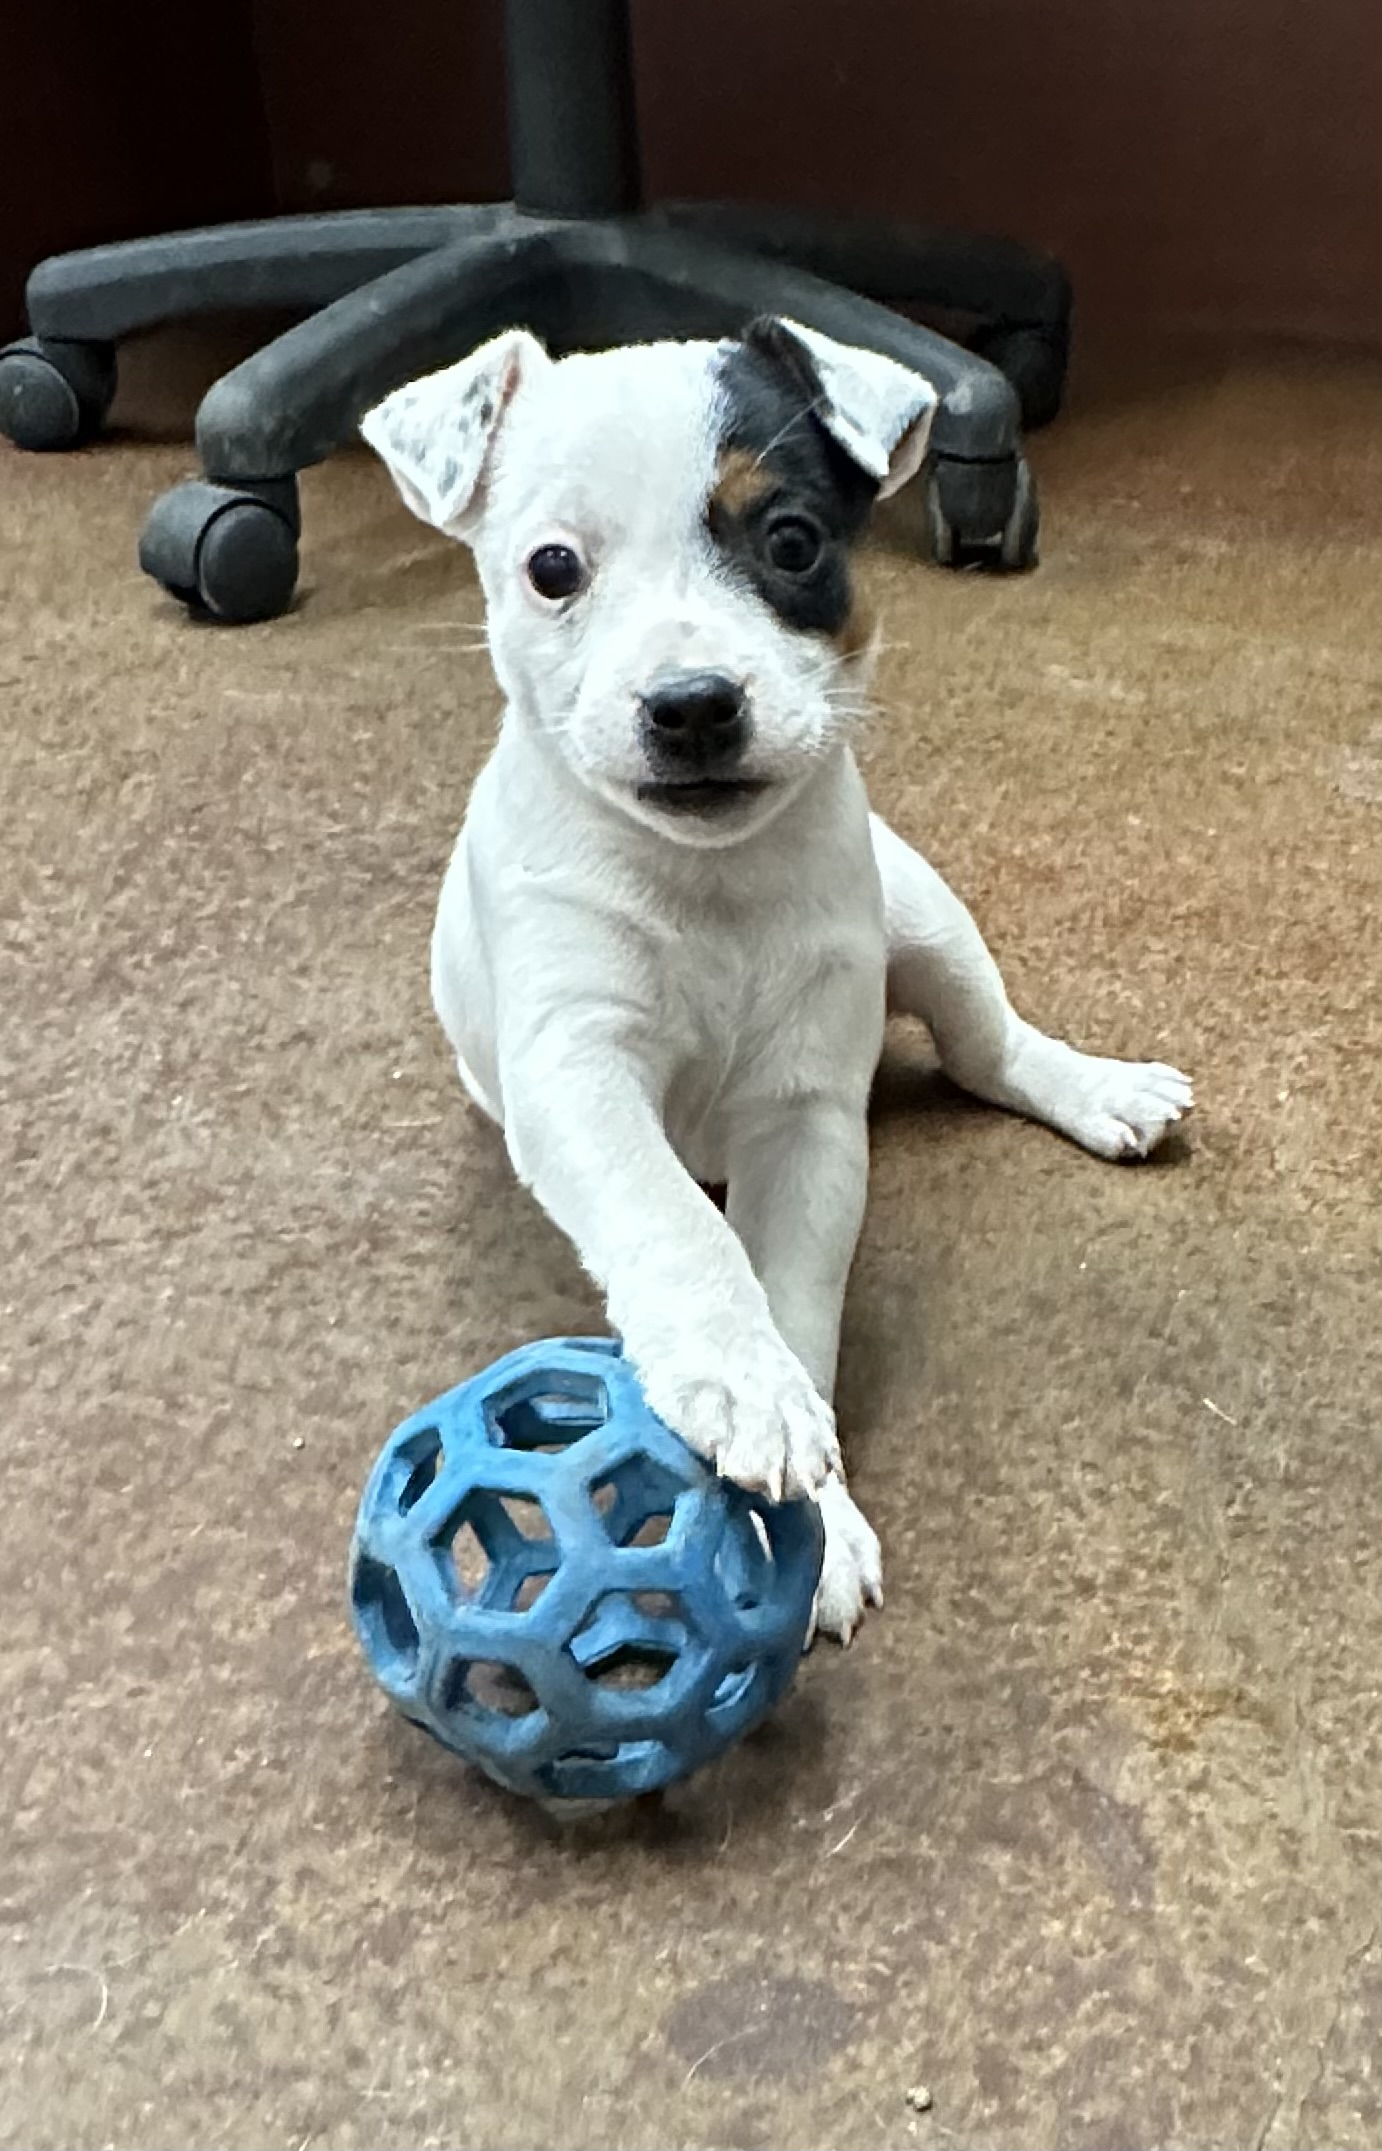 SOLD – Abby Female – Tri Smooth Female Jack Russell Terrier Puppy For Sale